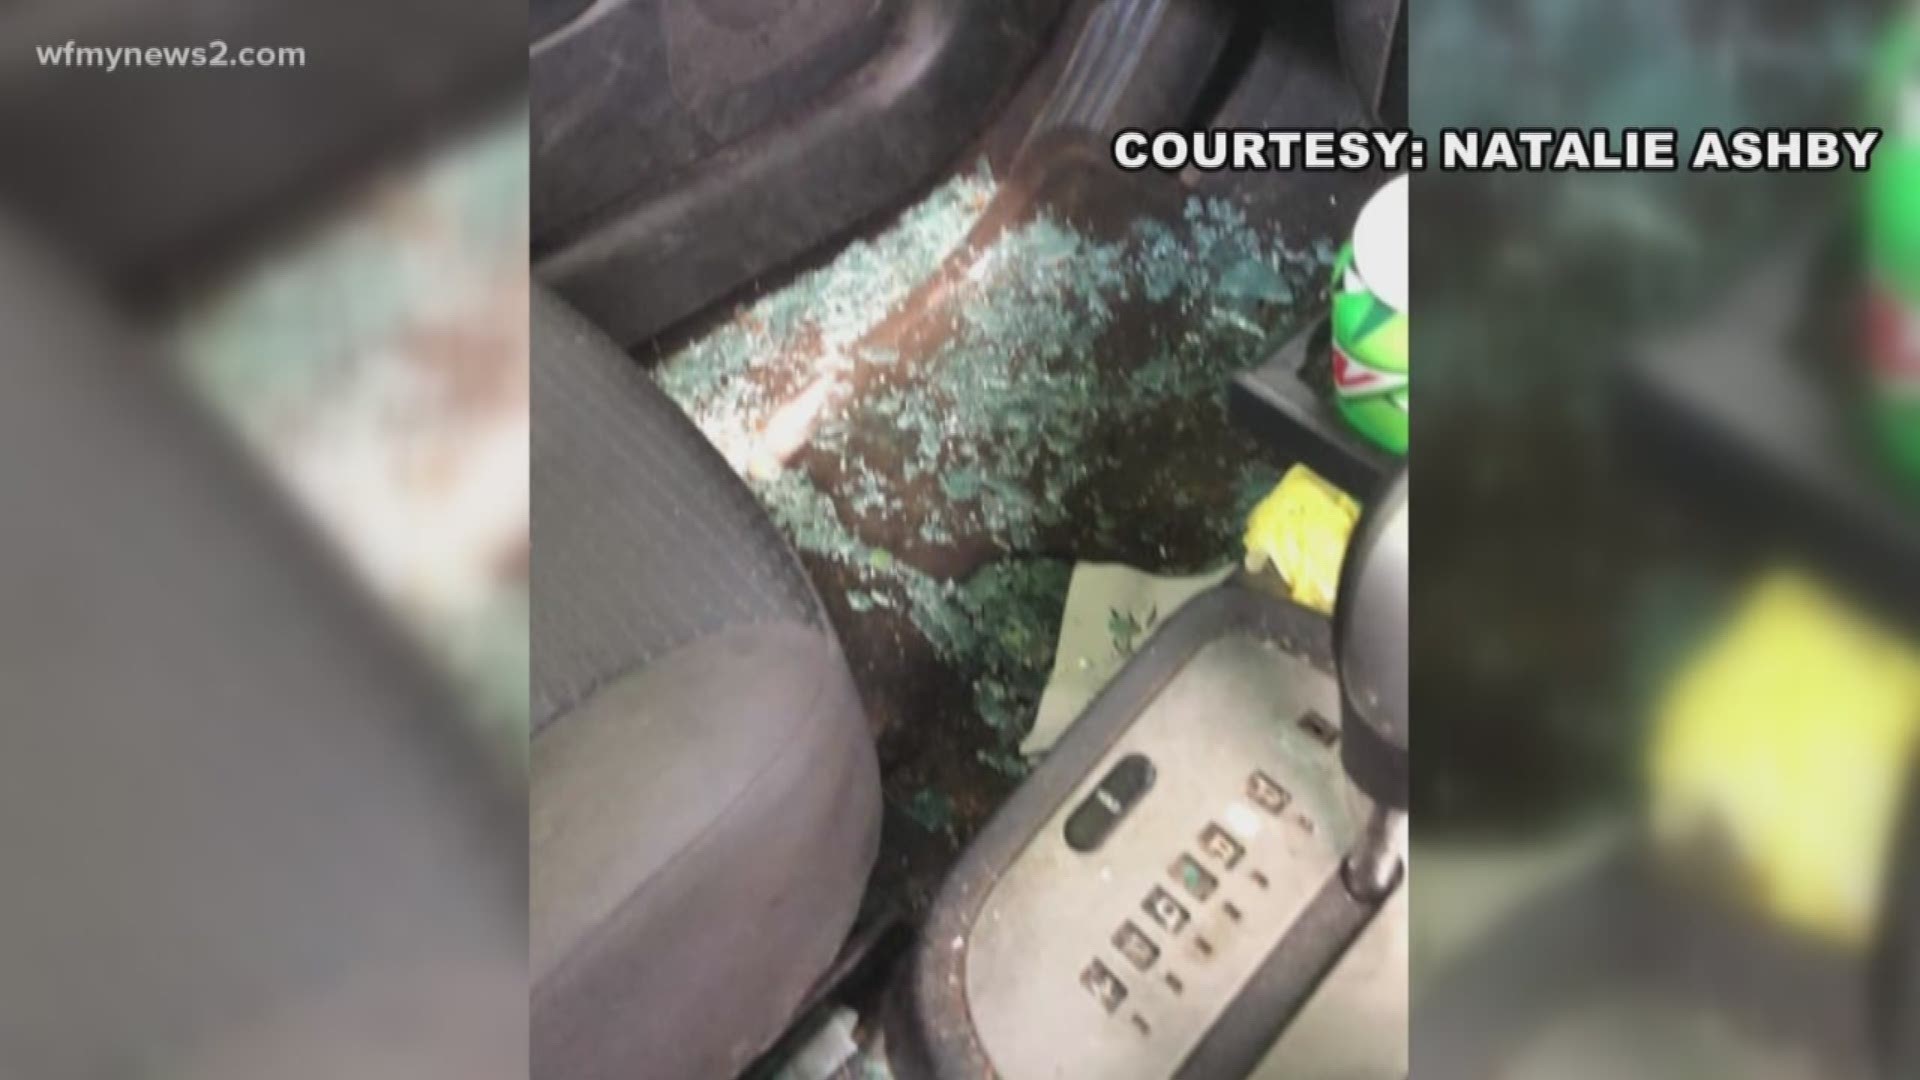 The smashed windshield wasn't the only disturbing thing the couple says they witnessed.